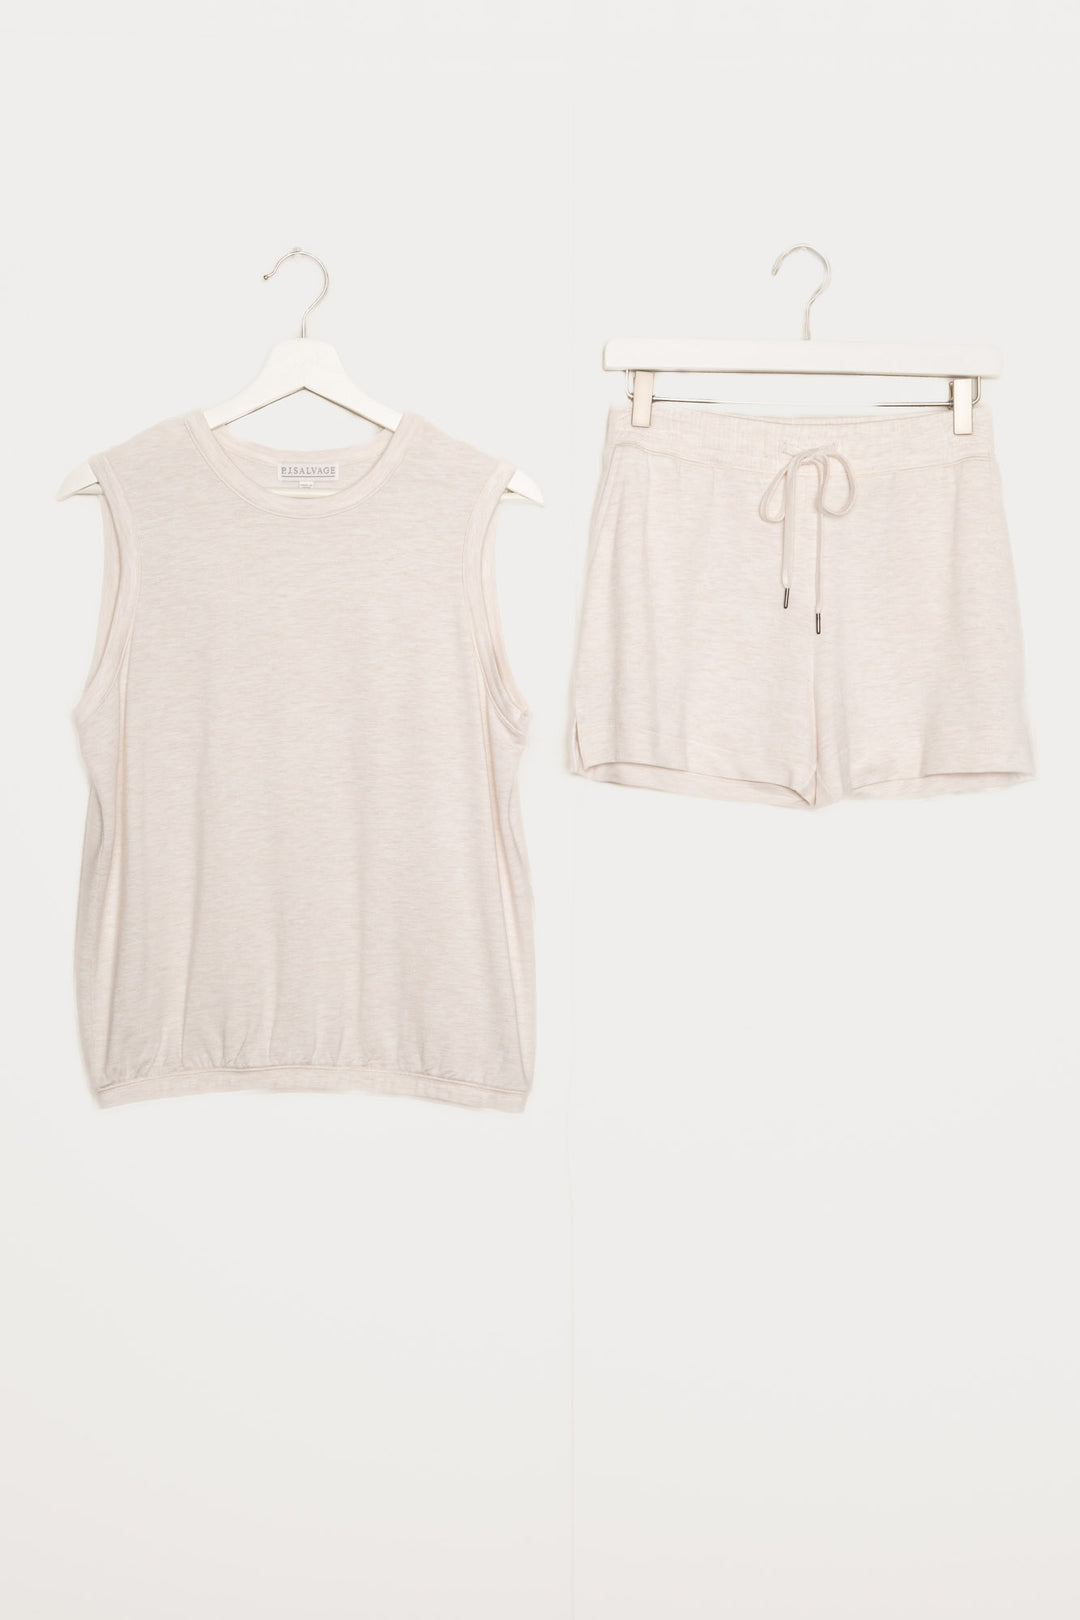 Oatmeal short set in baby French Terry knit. Sleeveless top with banded hem & pocket short. (7189030371428)